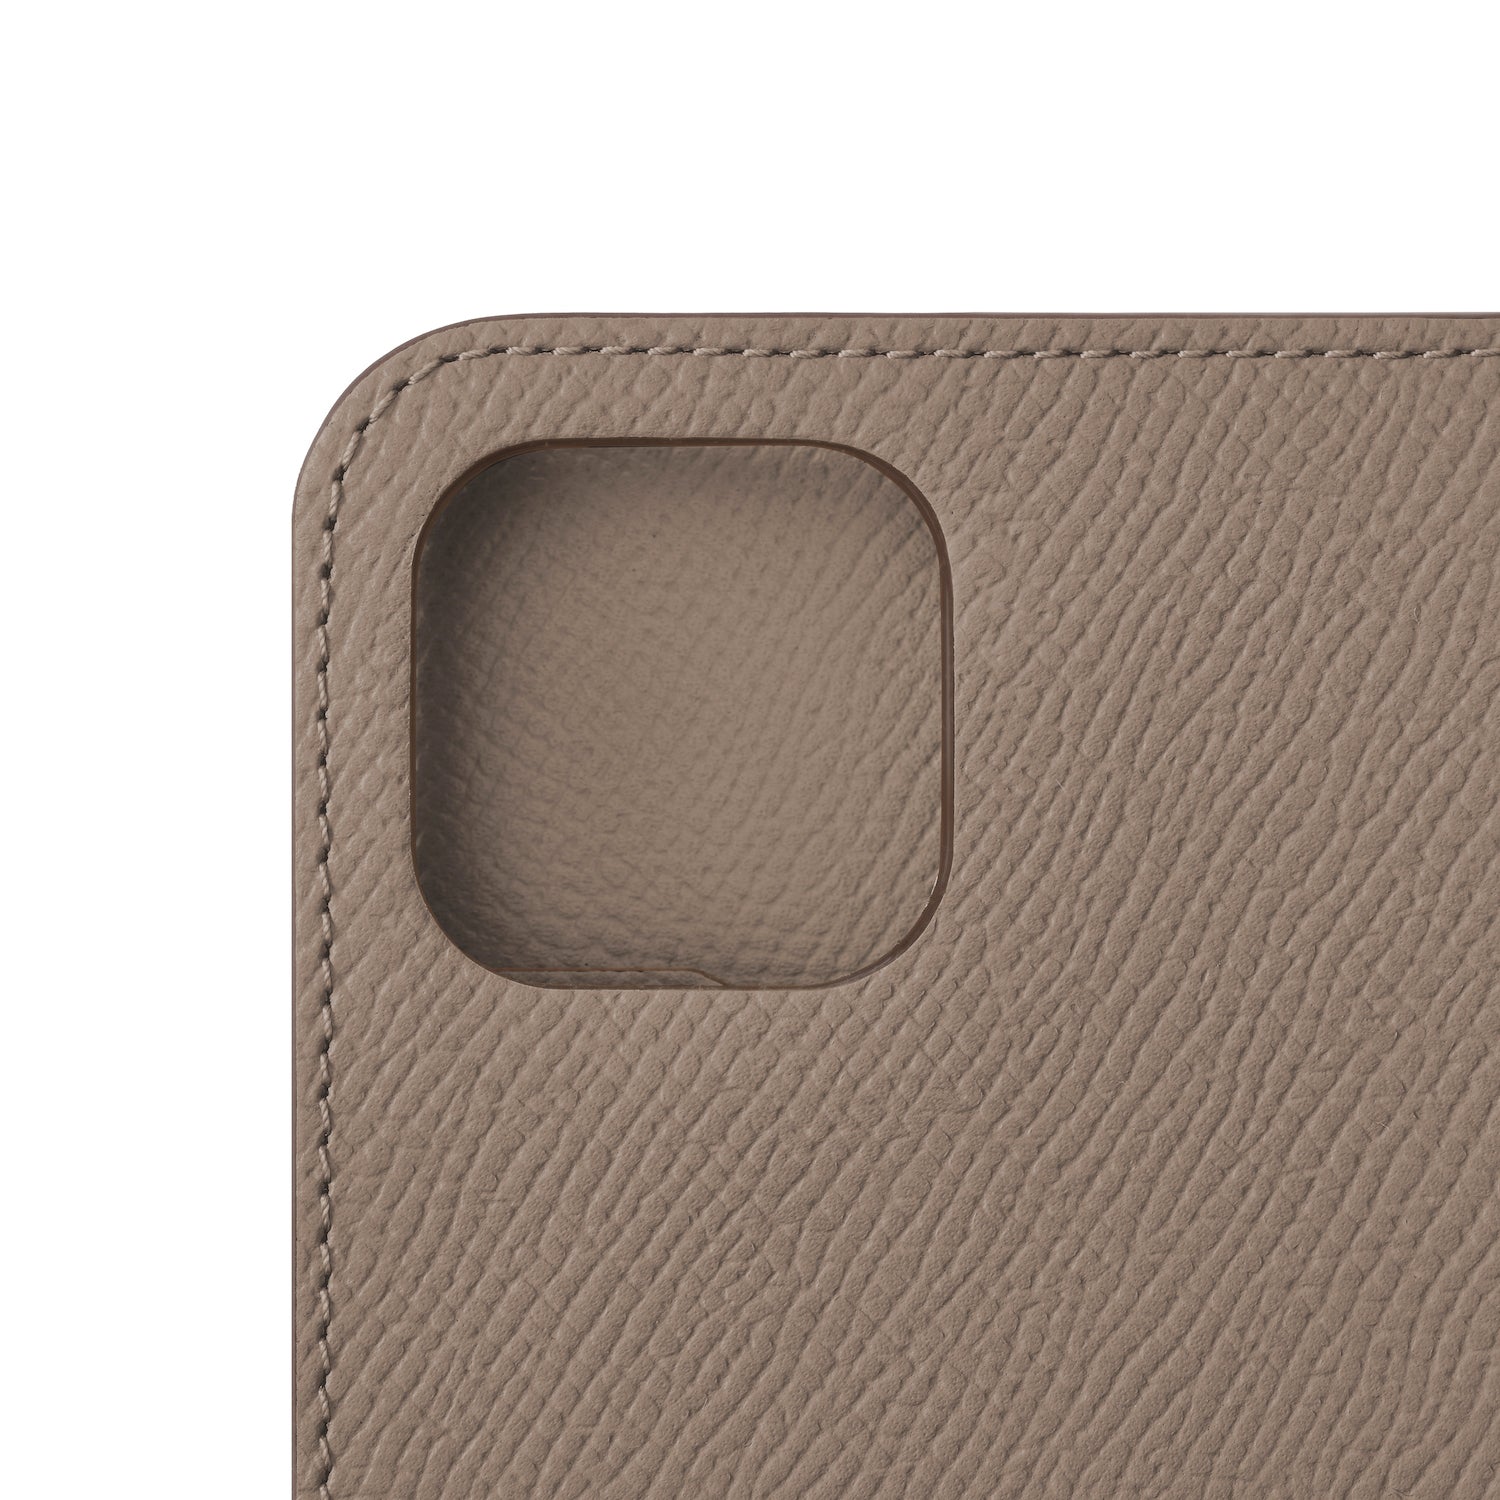 (iPhone 15) Diary Case Noblesse Leather